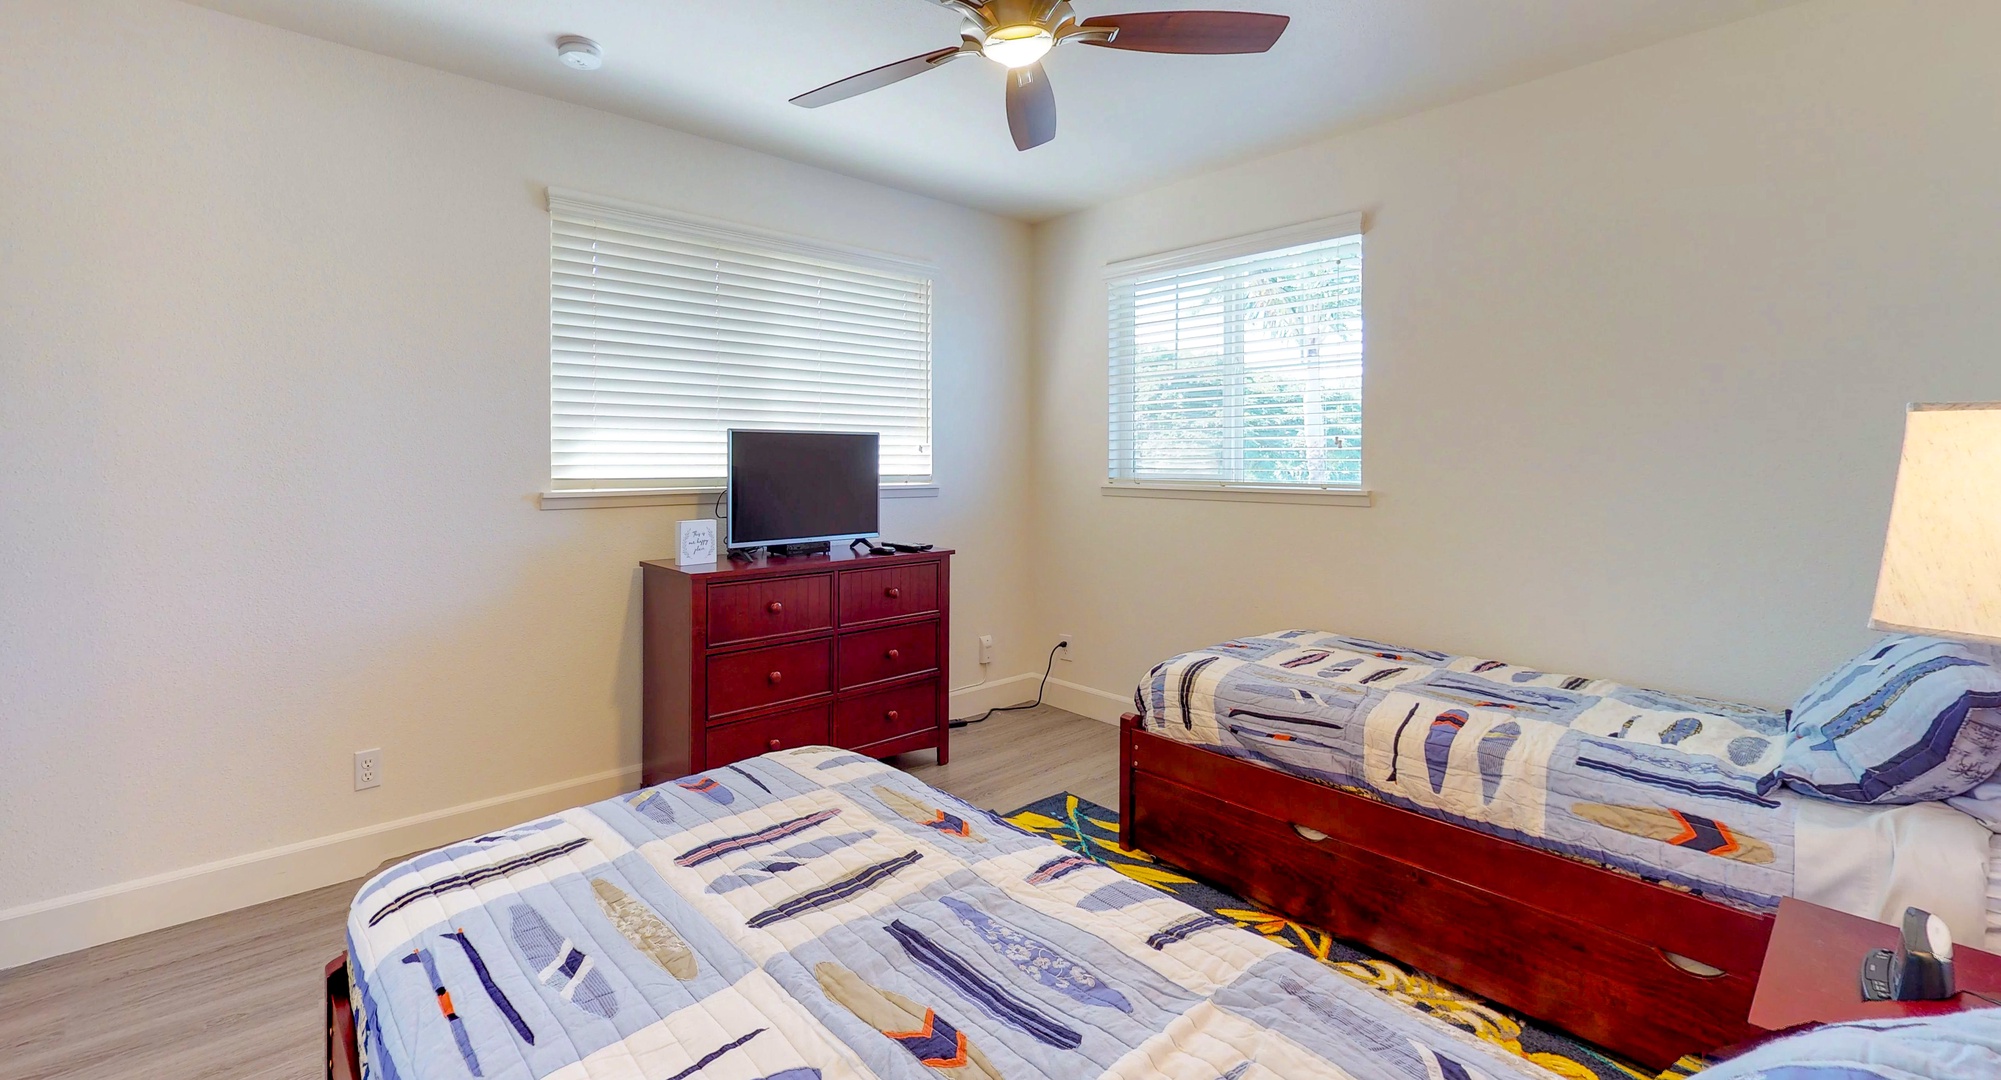 Kapolei Vacation Rentals, Ko Olina Kai 1051D - The third guest bedroom with a TV and natural lighting.